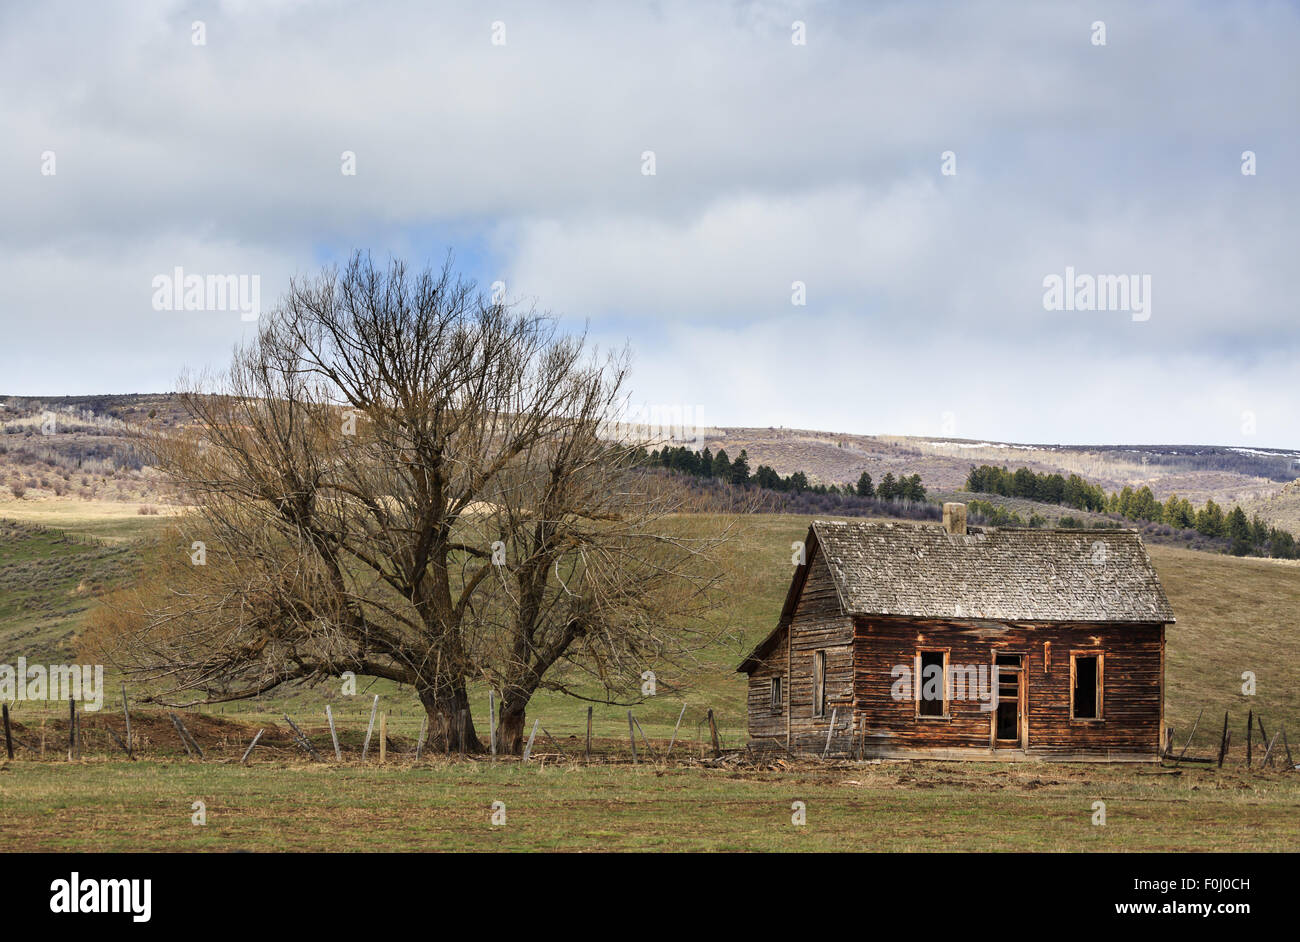 Abandoned log cabin farmhouse and tree in the middle of a field and rolling hills Stock Photo